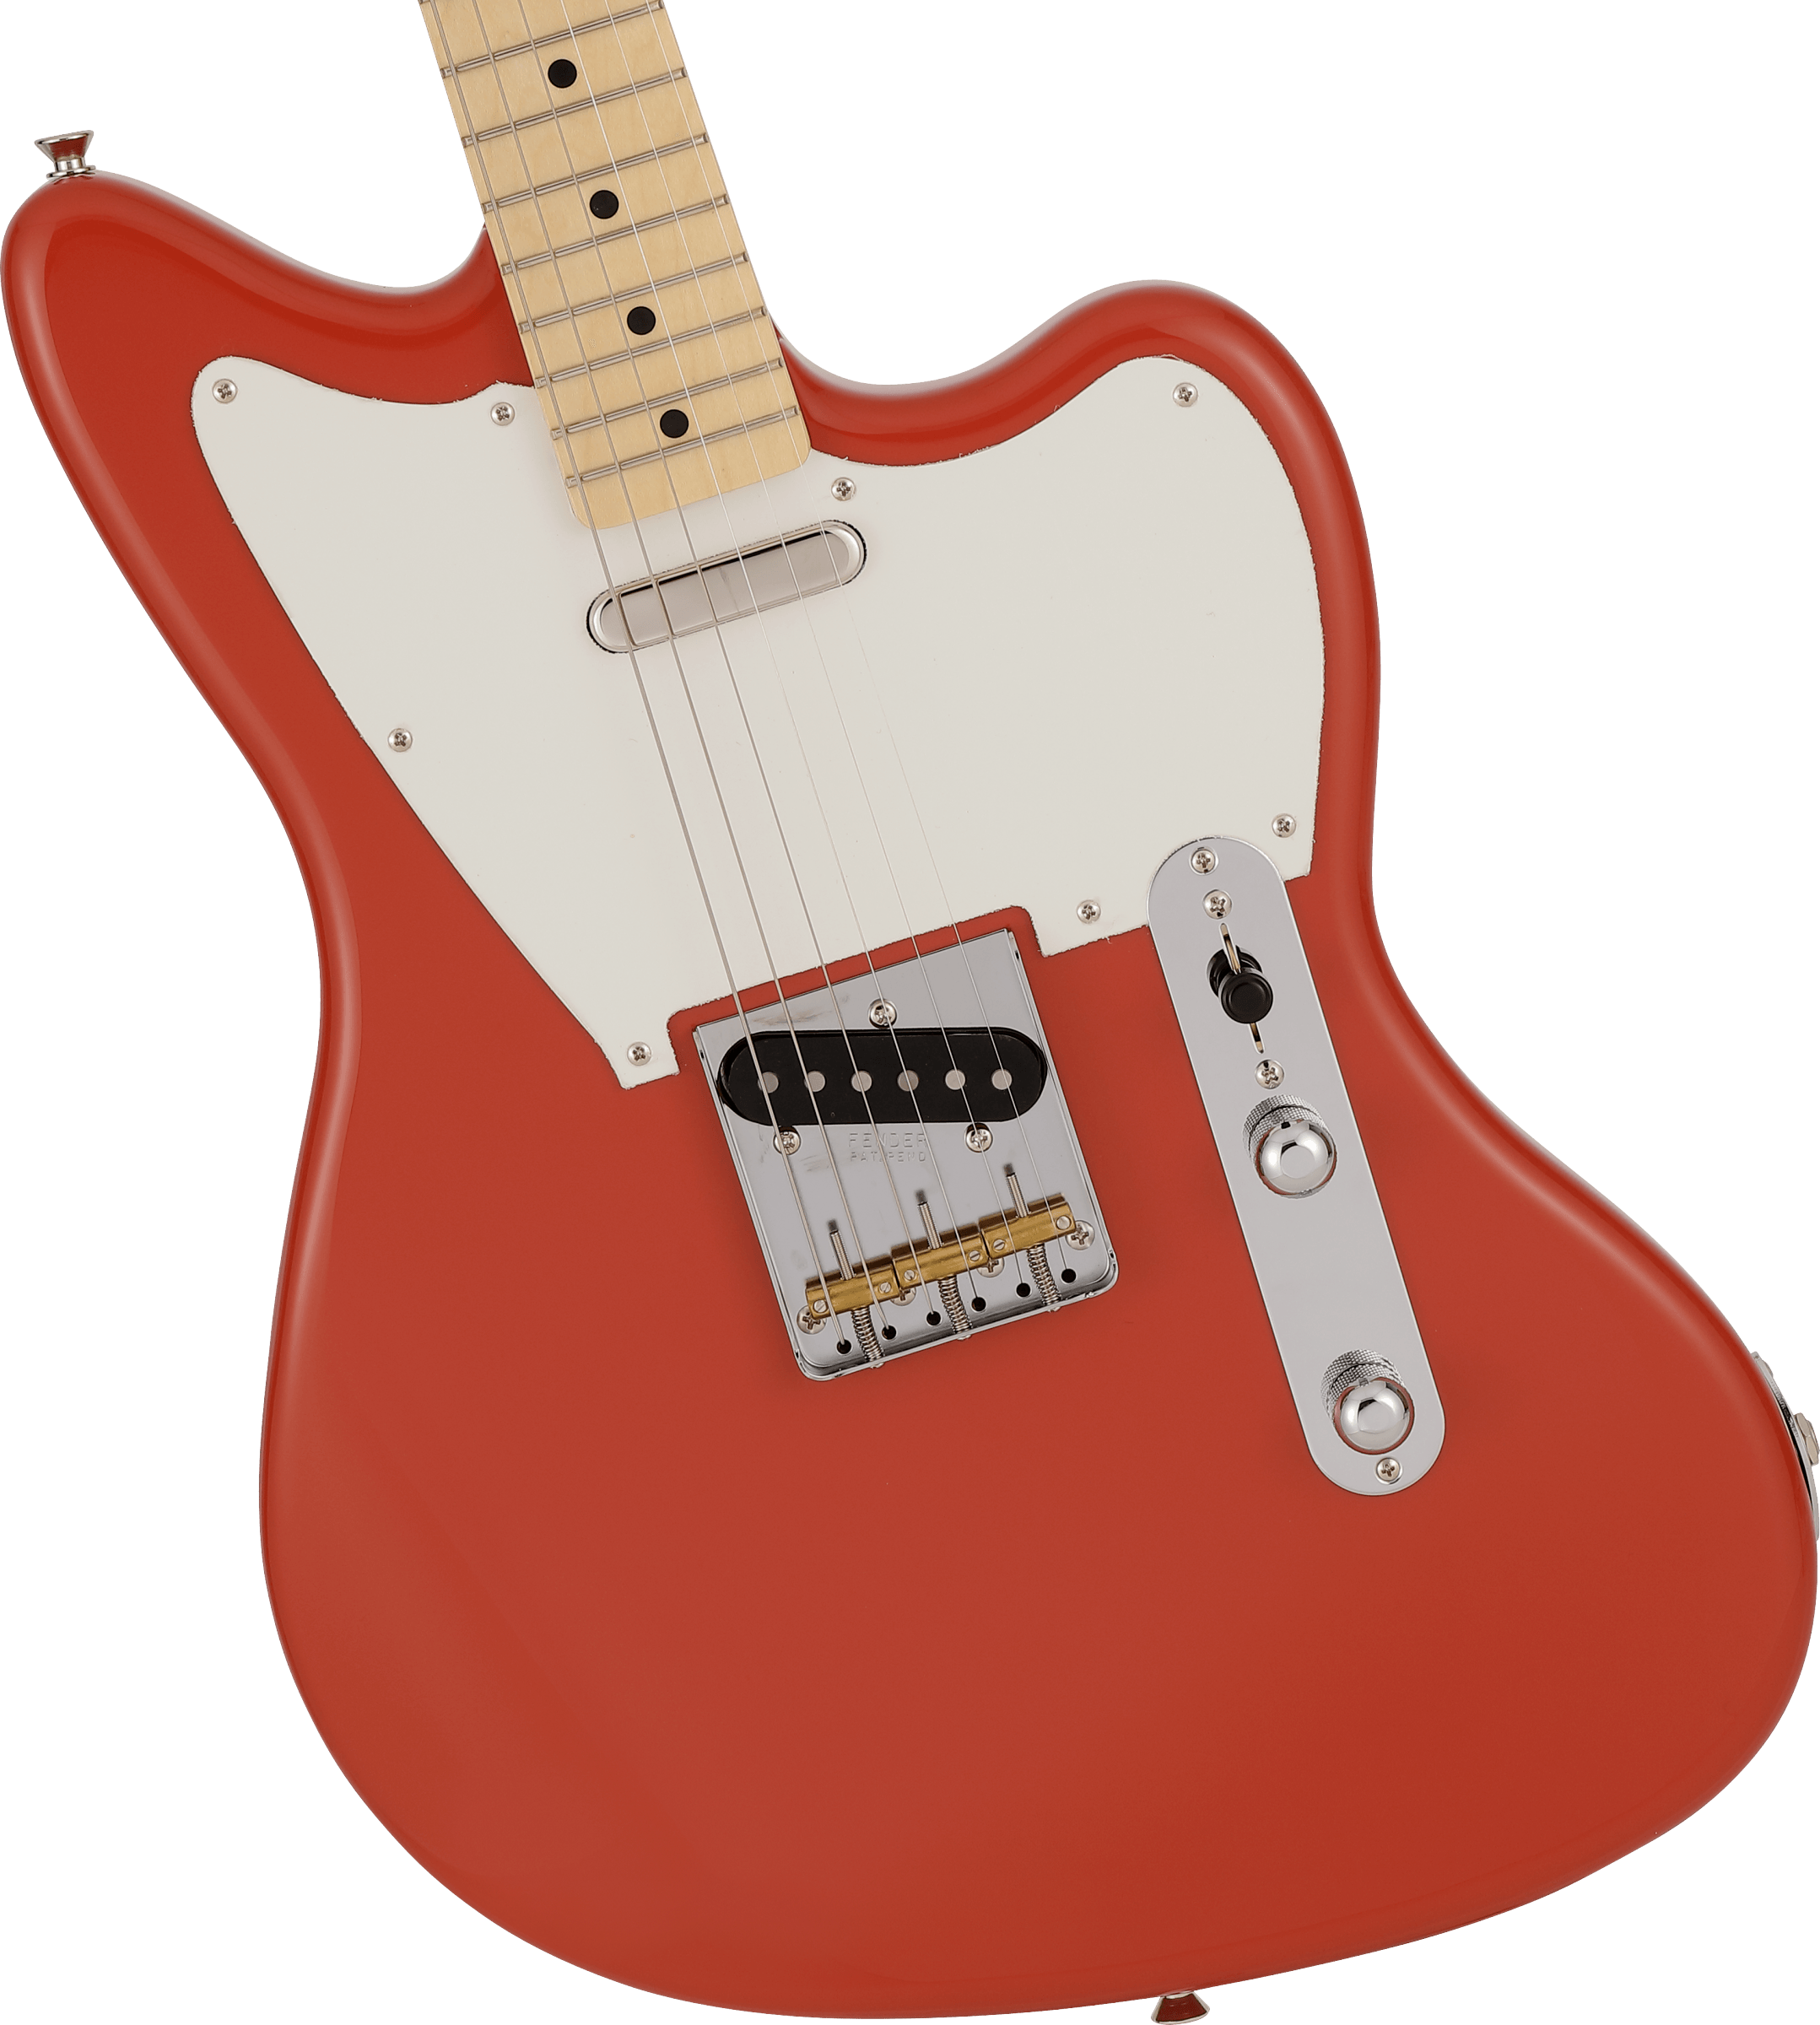 Made in Japan Offset Telecaster, Fiesta Red, MN